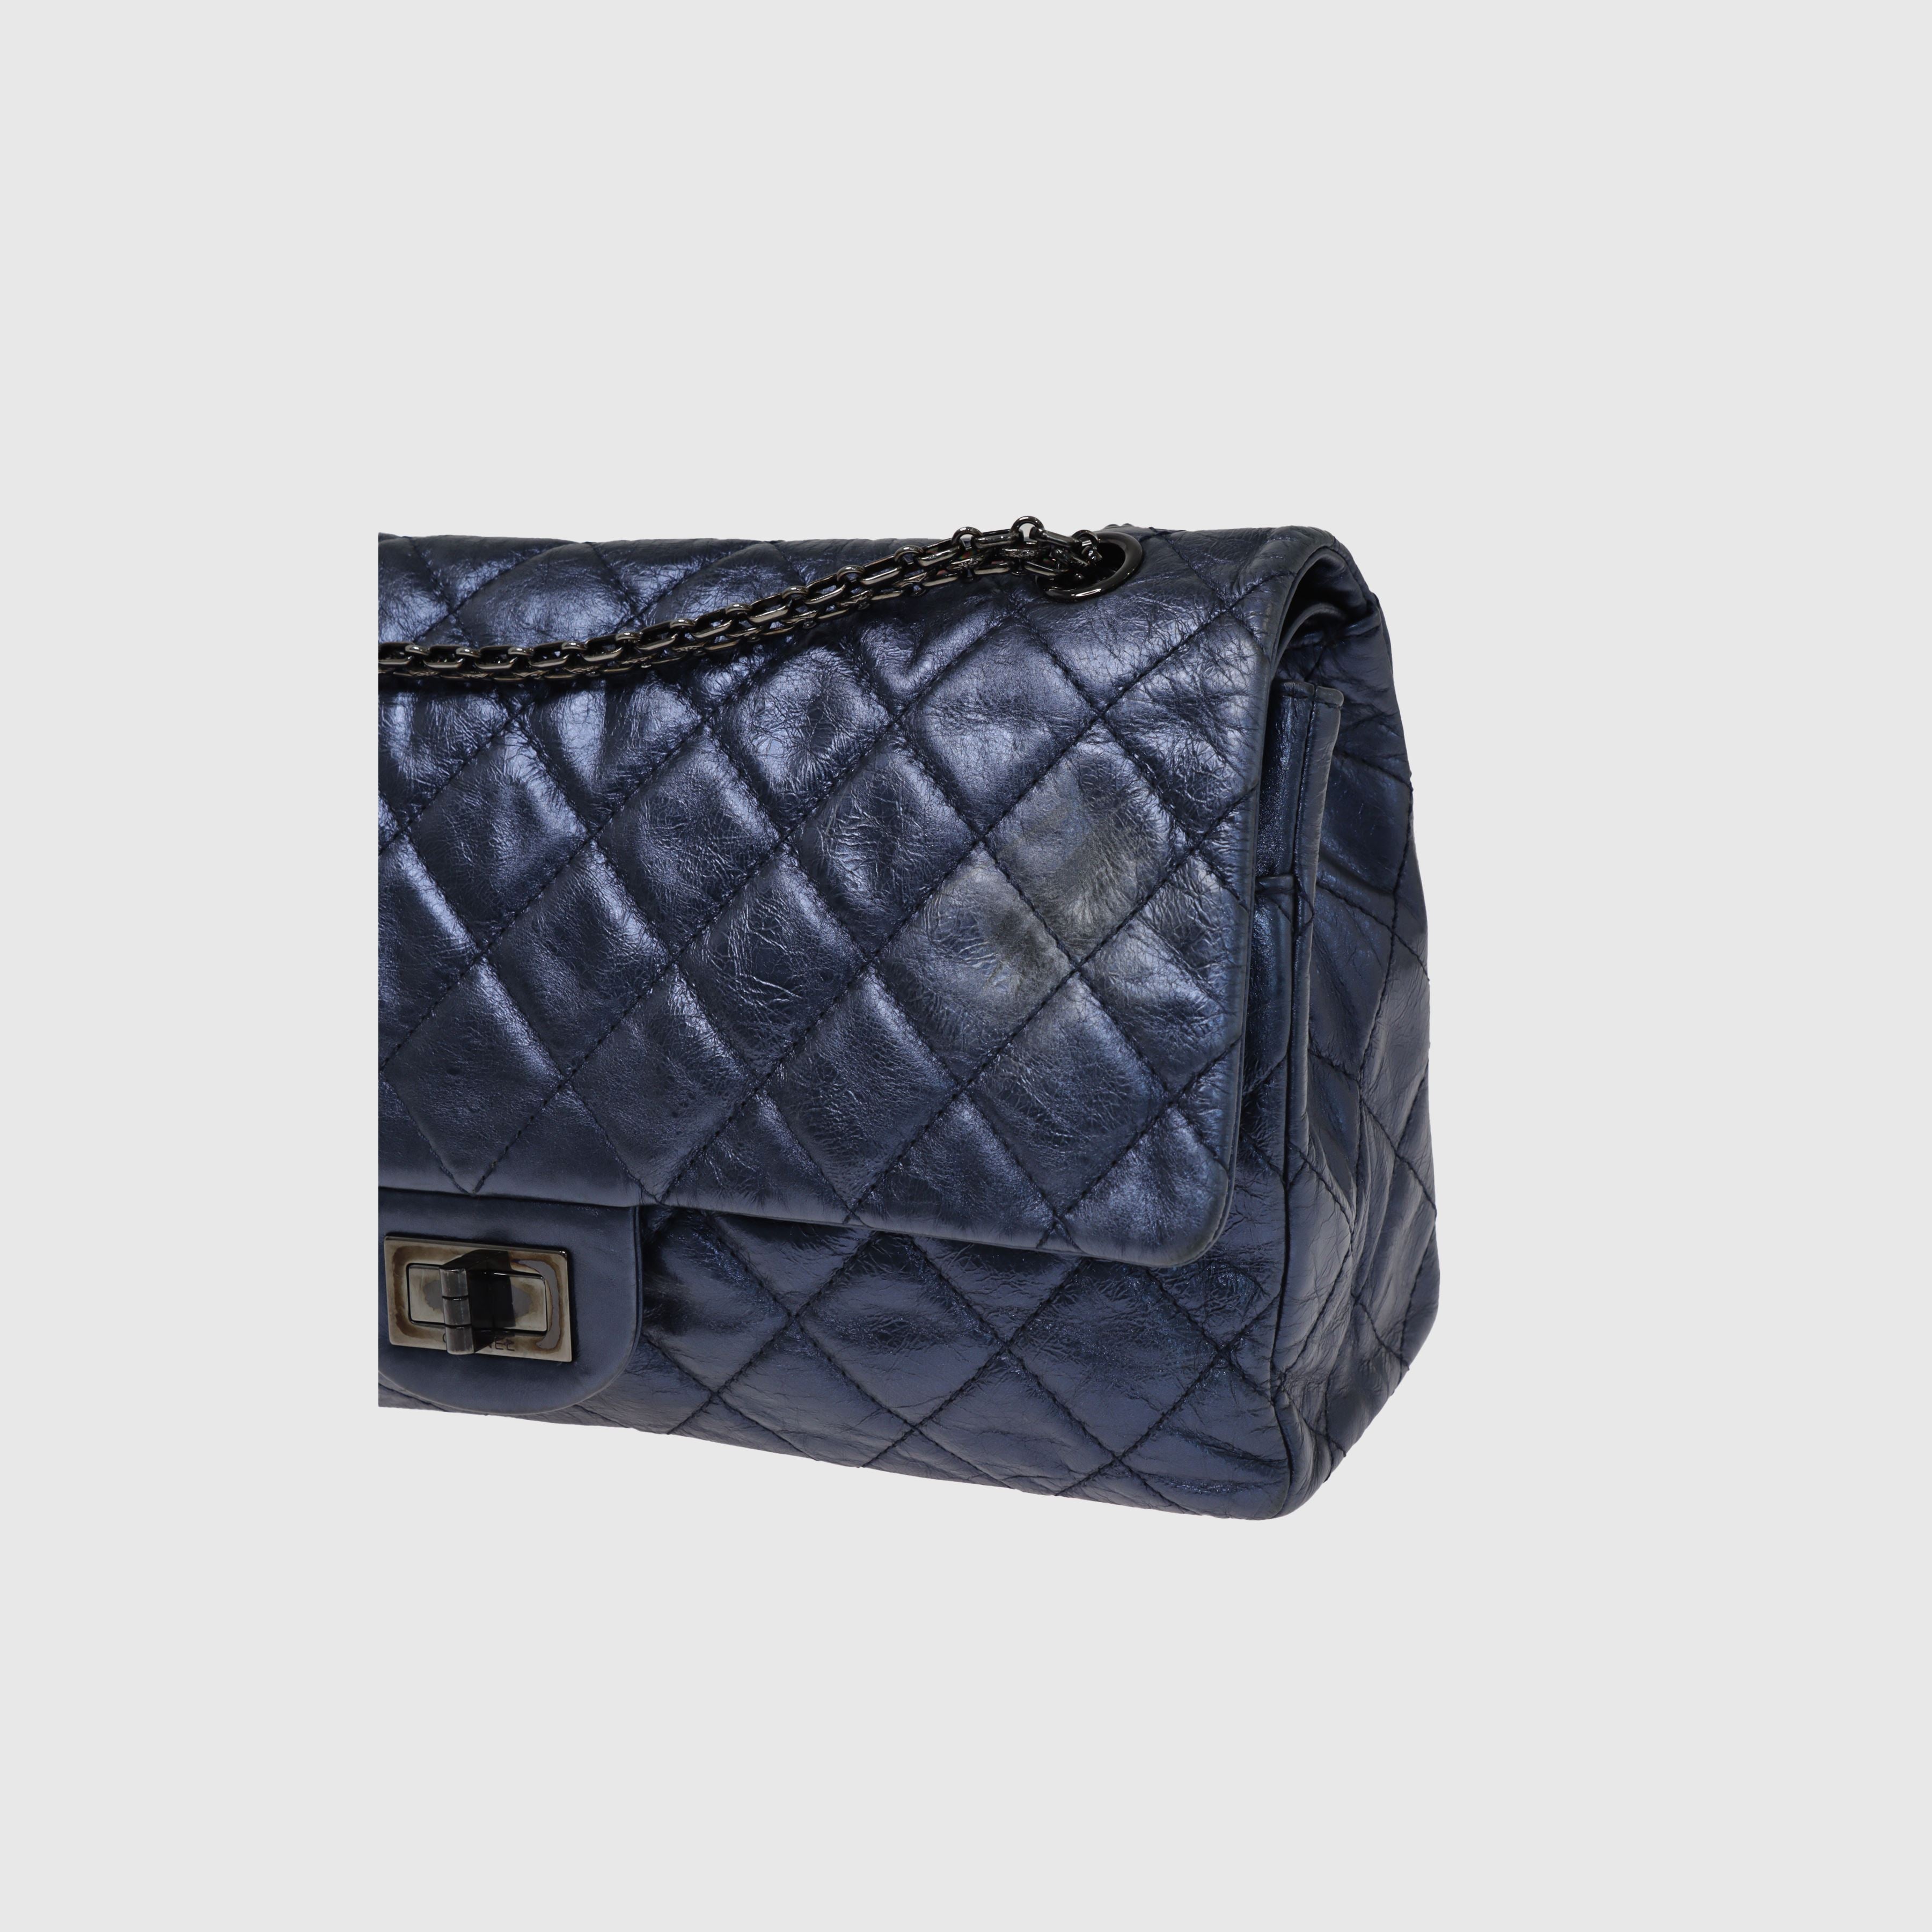 Metallic Blue Quilted Reissue 2.55 Classic 227 Double Flap Bag Bags Chanel 